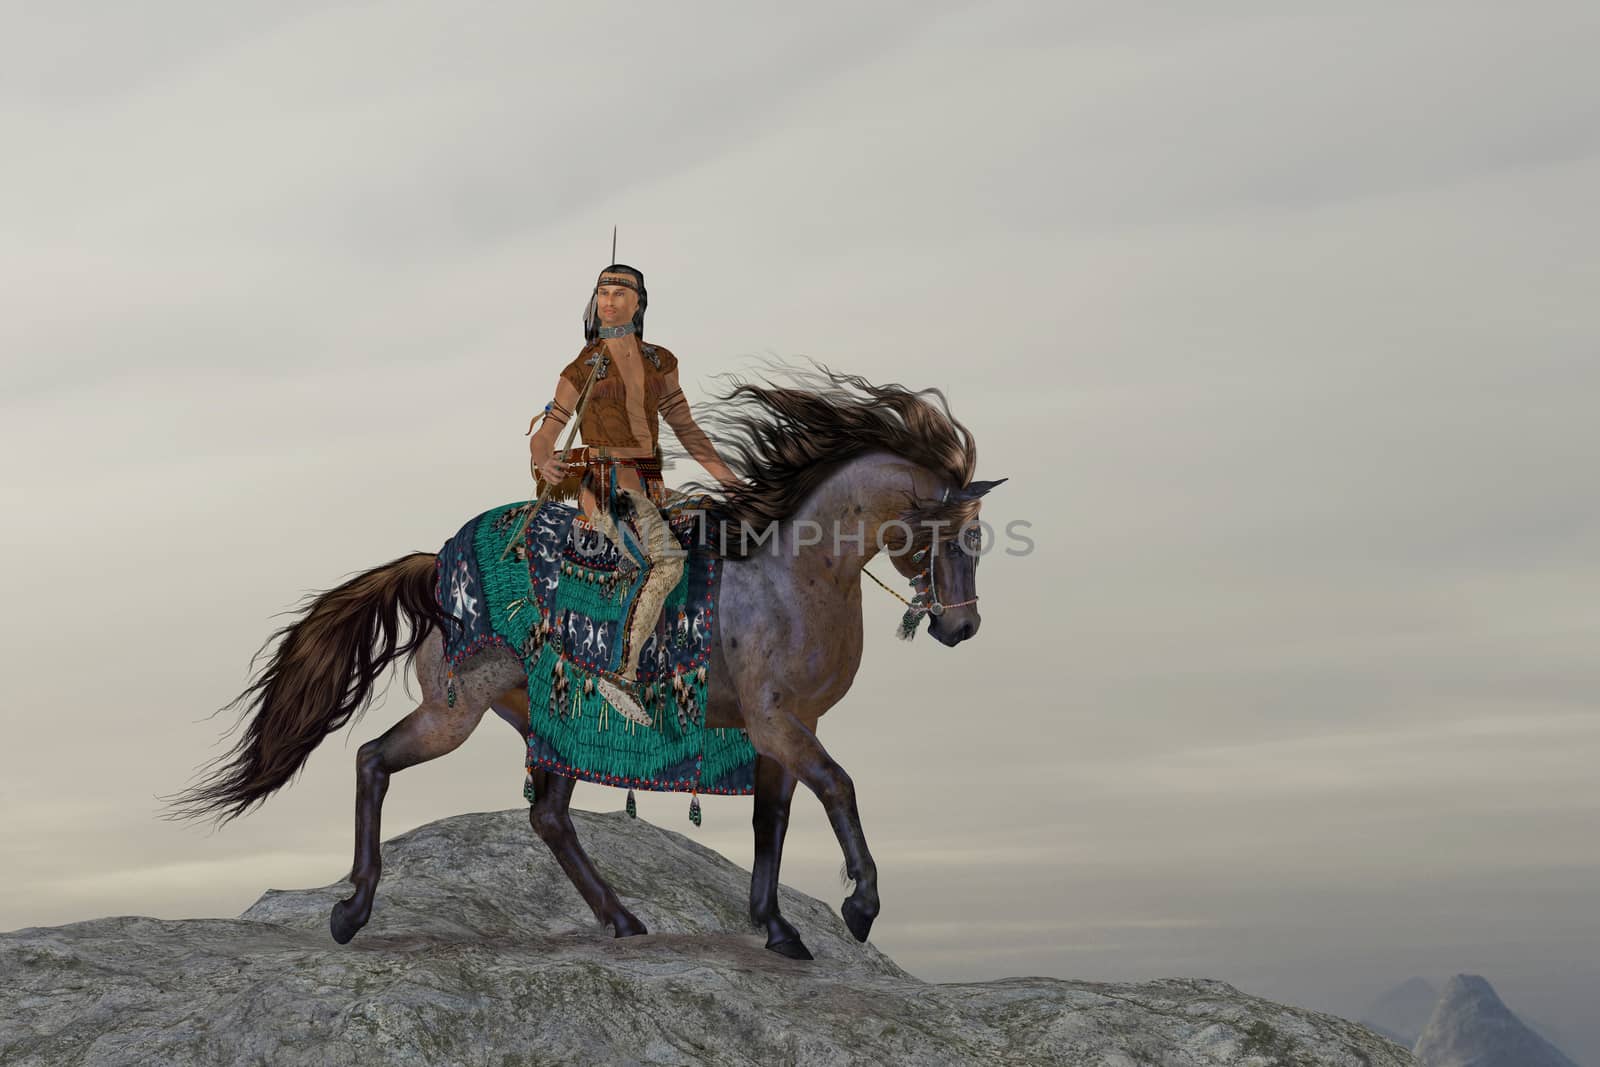 A North American Indian brave searches the mountains on his horse for big game to bring back to his tribe.